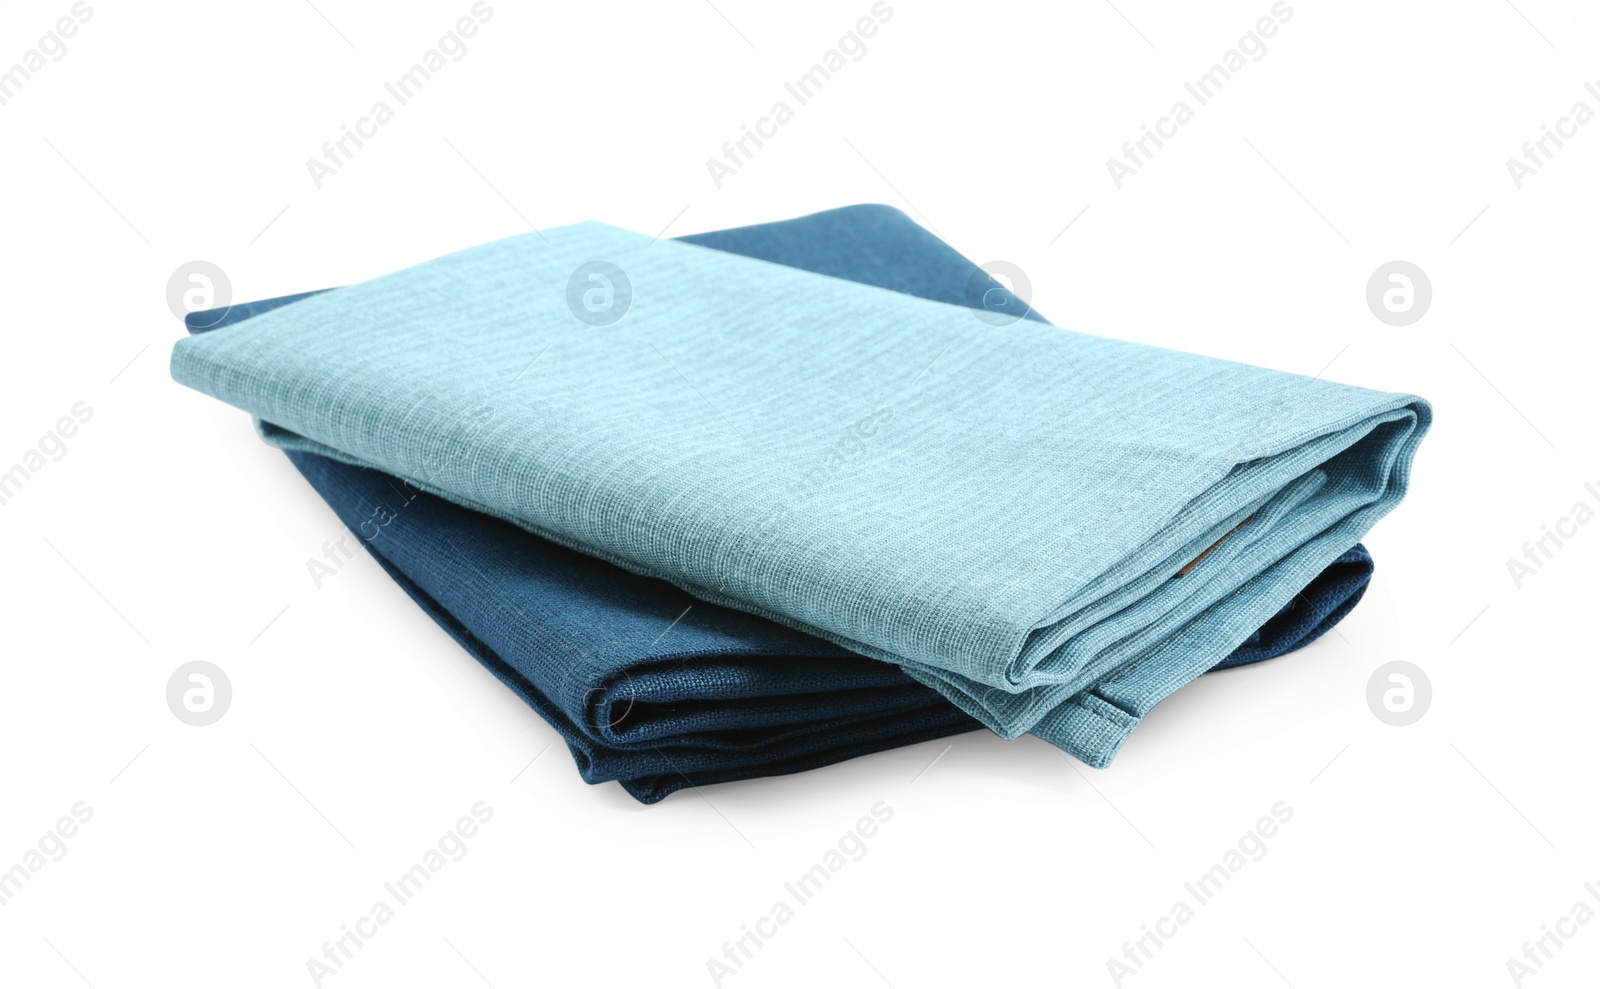 Photo of Folded fabric napkins for table setting isolated on white